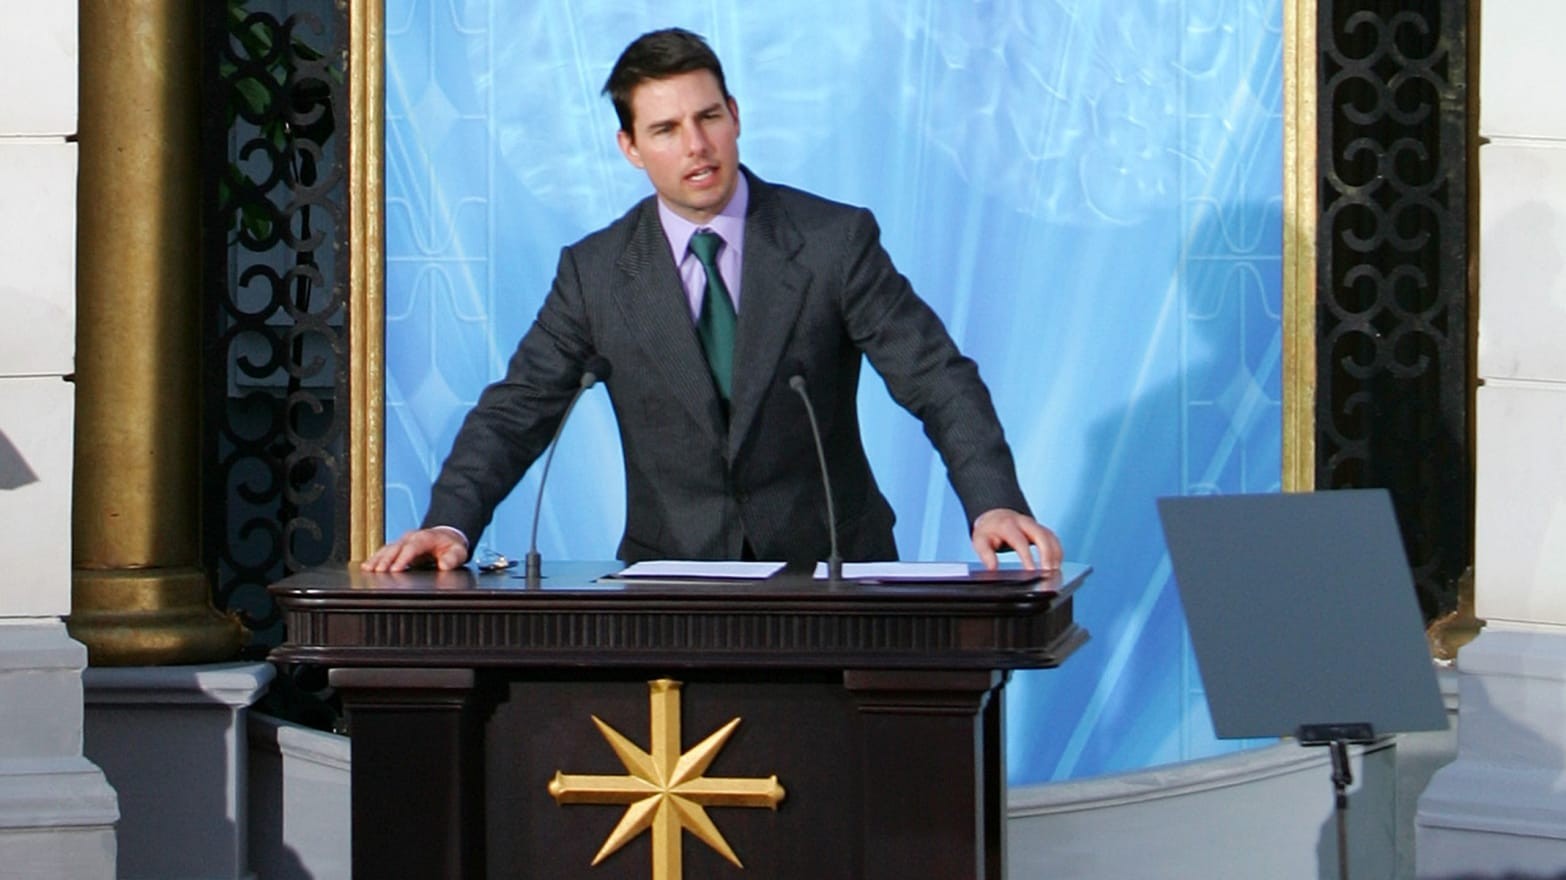 Tom Cruise at the Church of Scientology